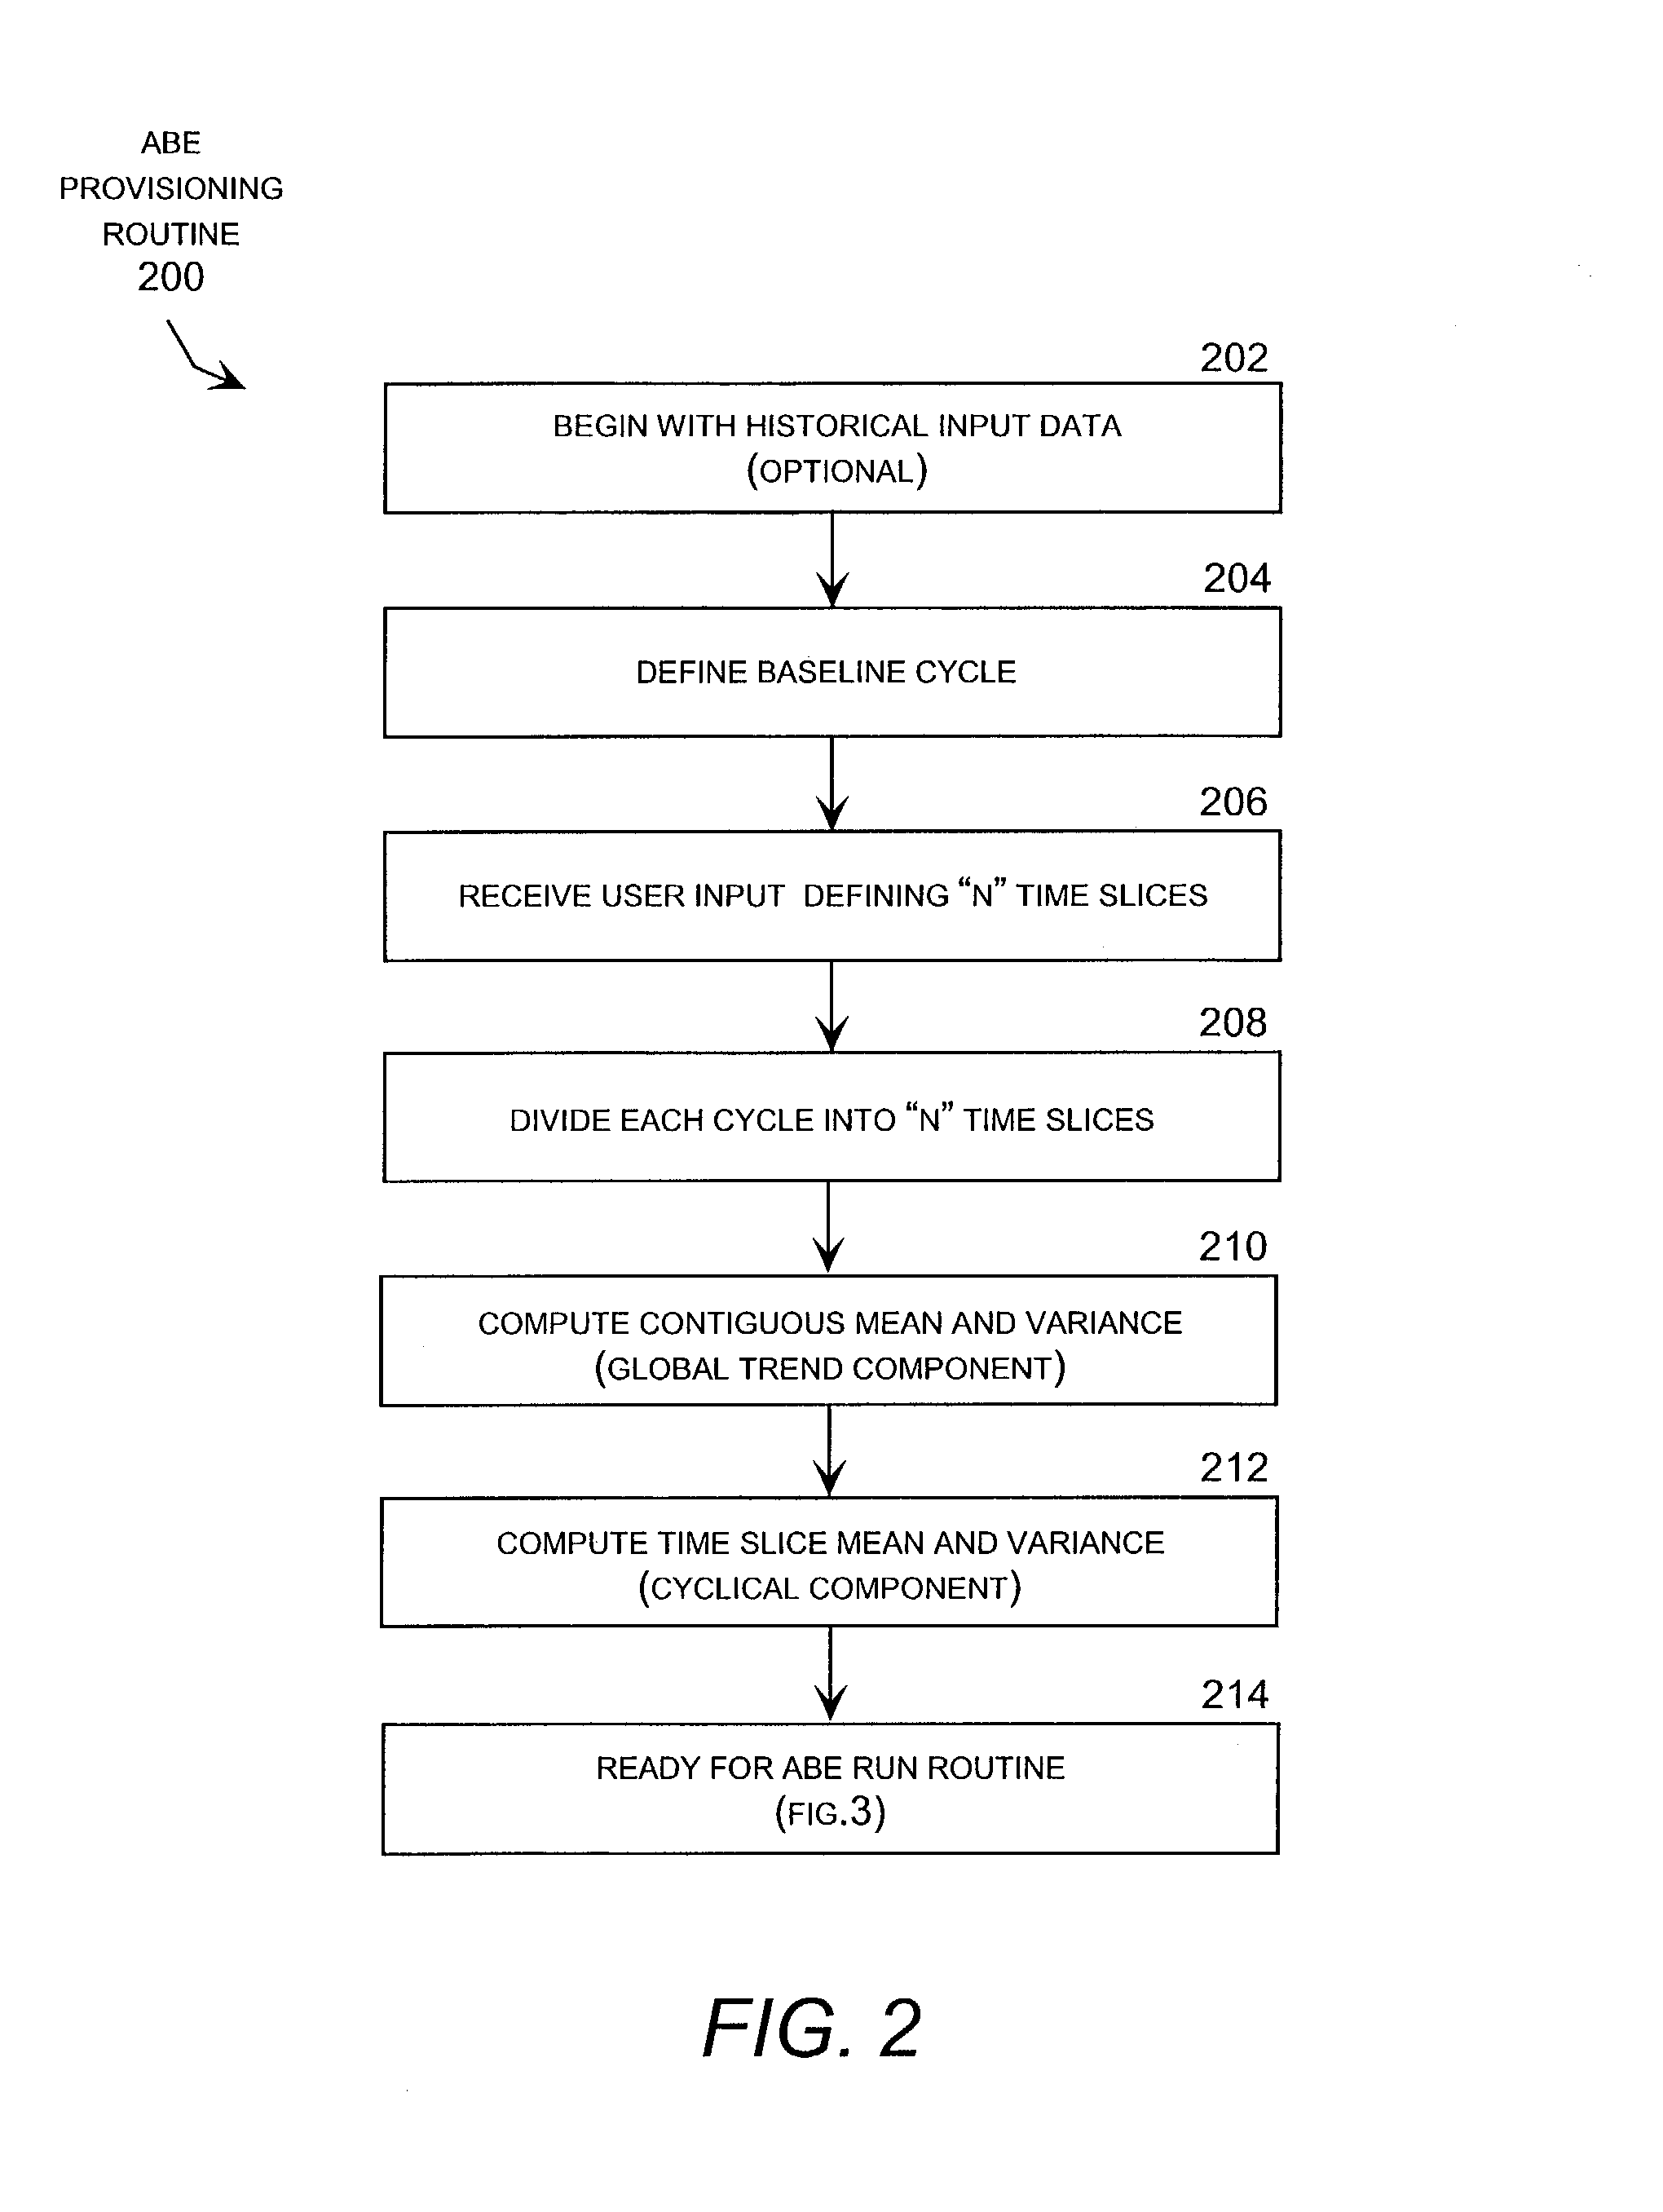 Method and system for analyzing and predicting the performance of computer network using time series measurements